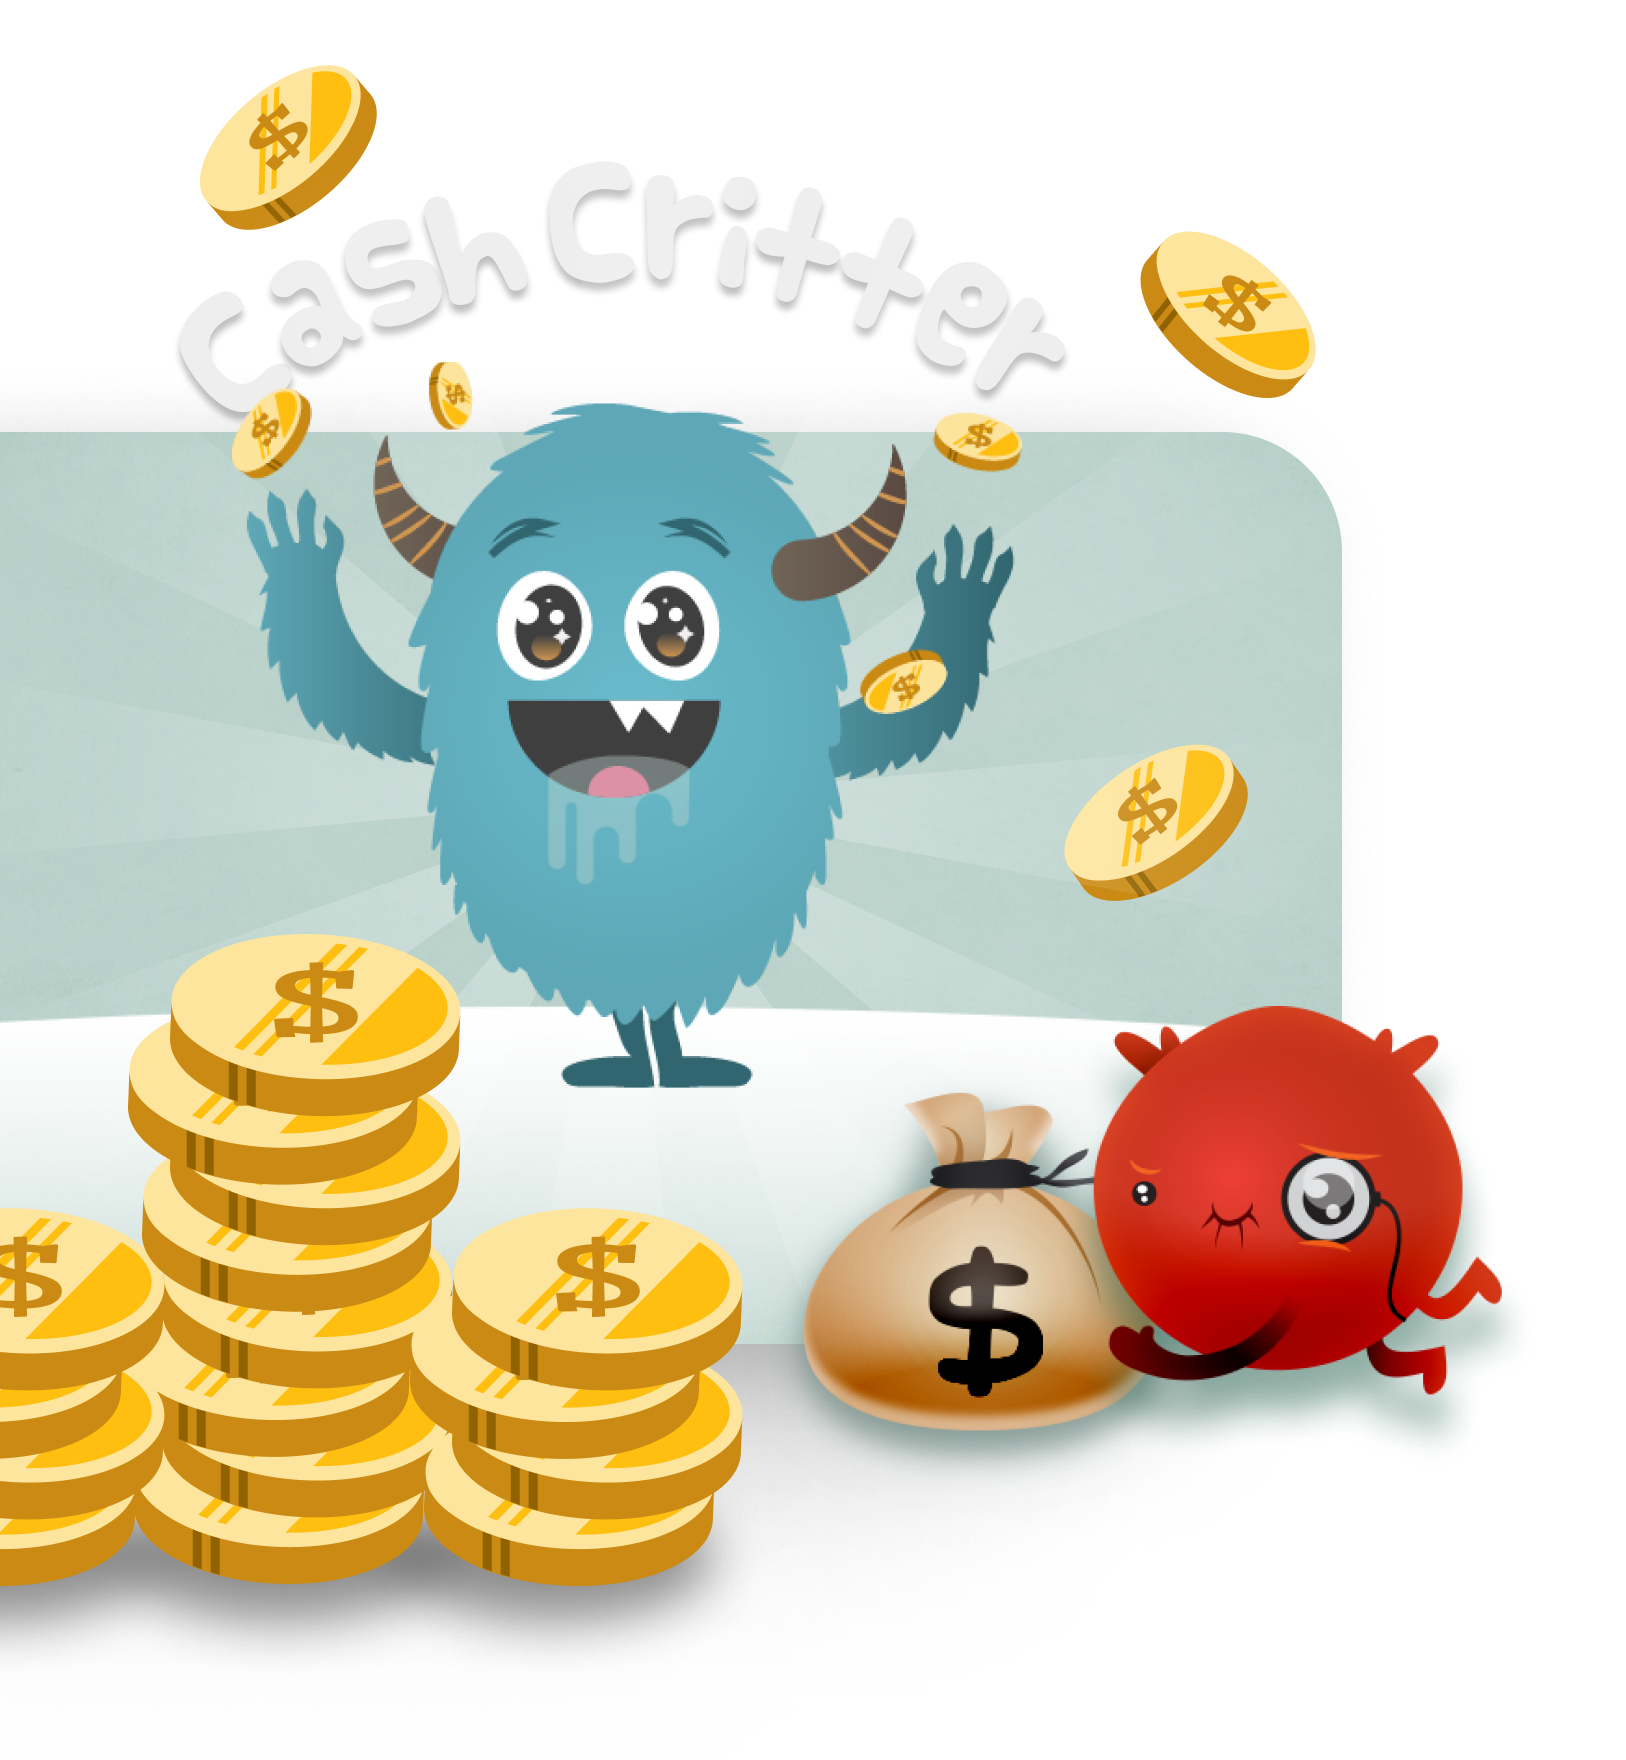 A friendly blue monster under the name "Cash Critter" throwing coins in the air, a few piles of coins and a little red monster with a money bag.